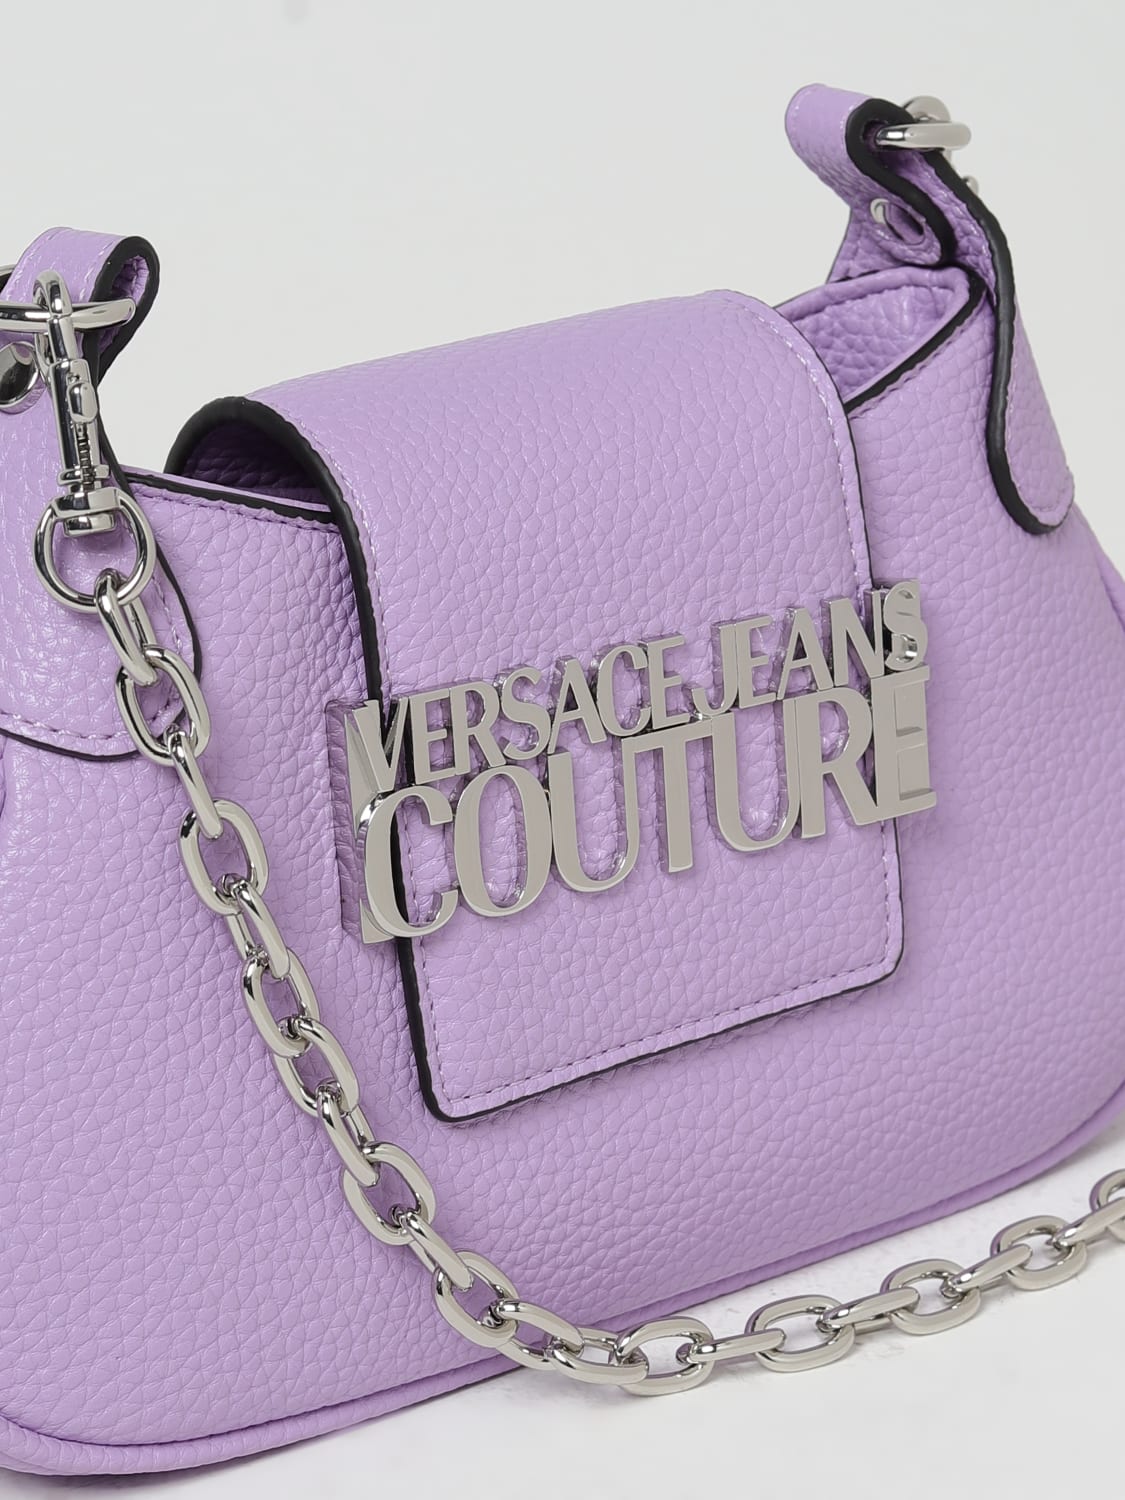 VERSACE JEANS COUTURE ショルダーバッグ ボディバッグ